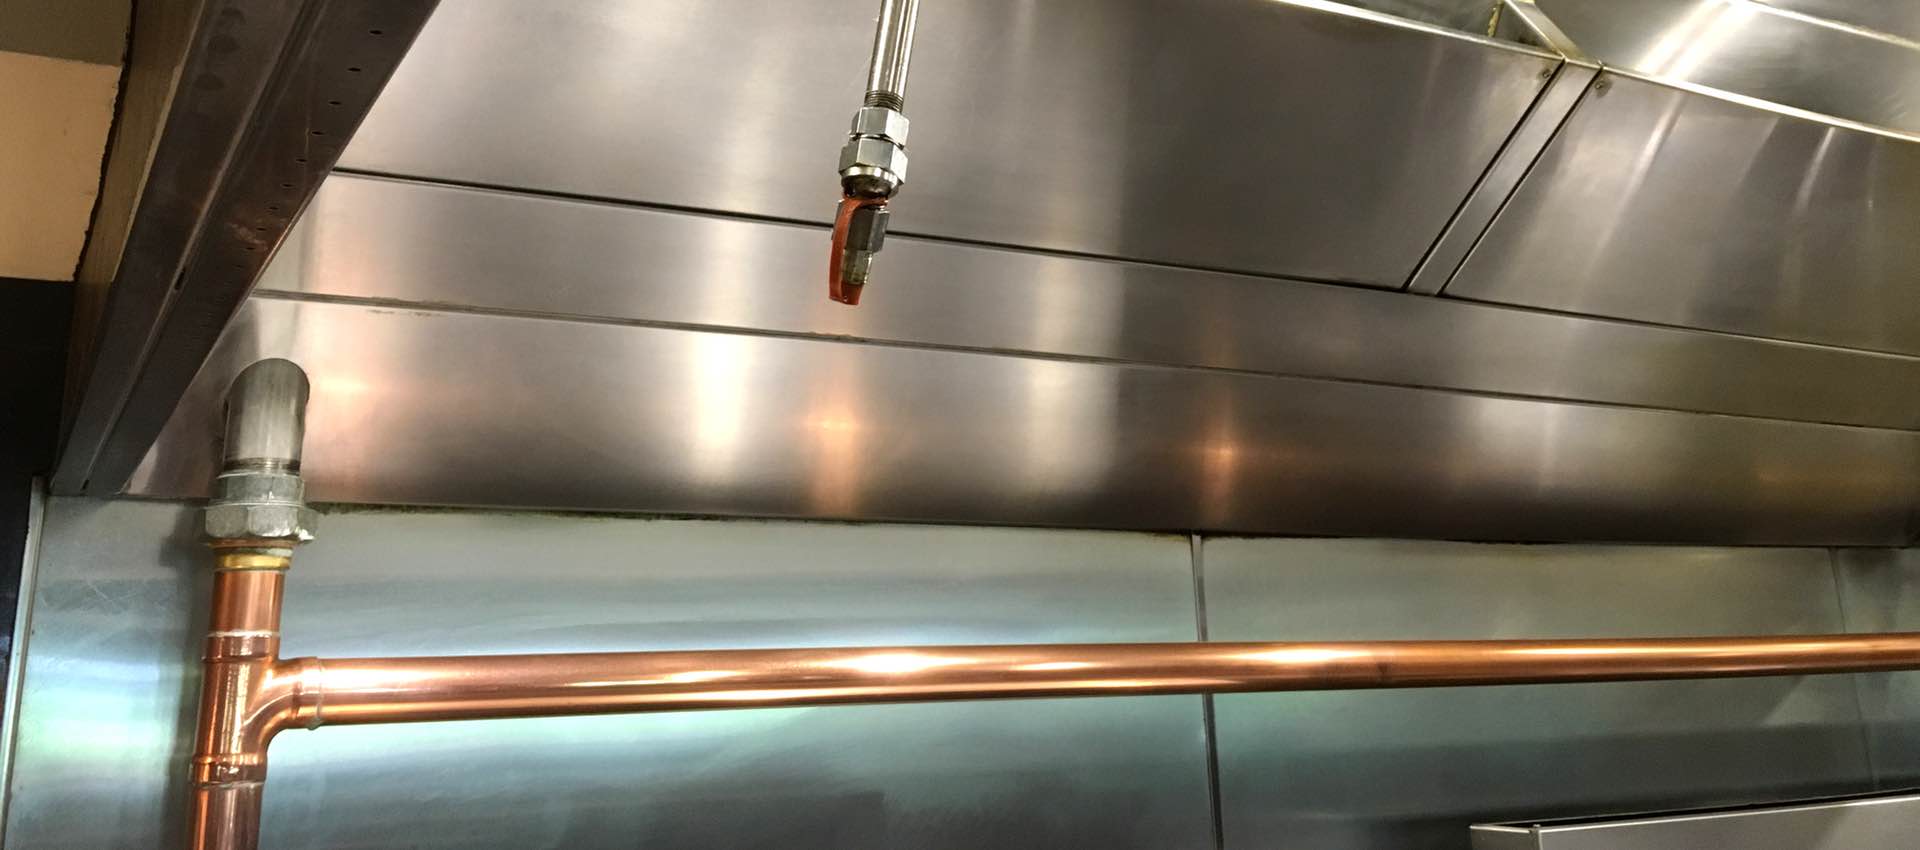 UV Kitchen Exhaust: Self-Cleaning Technology - LightSources